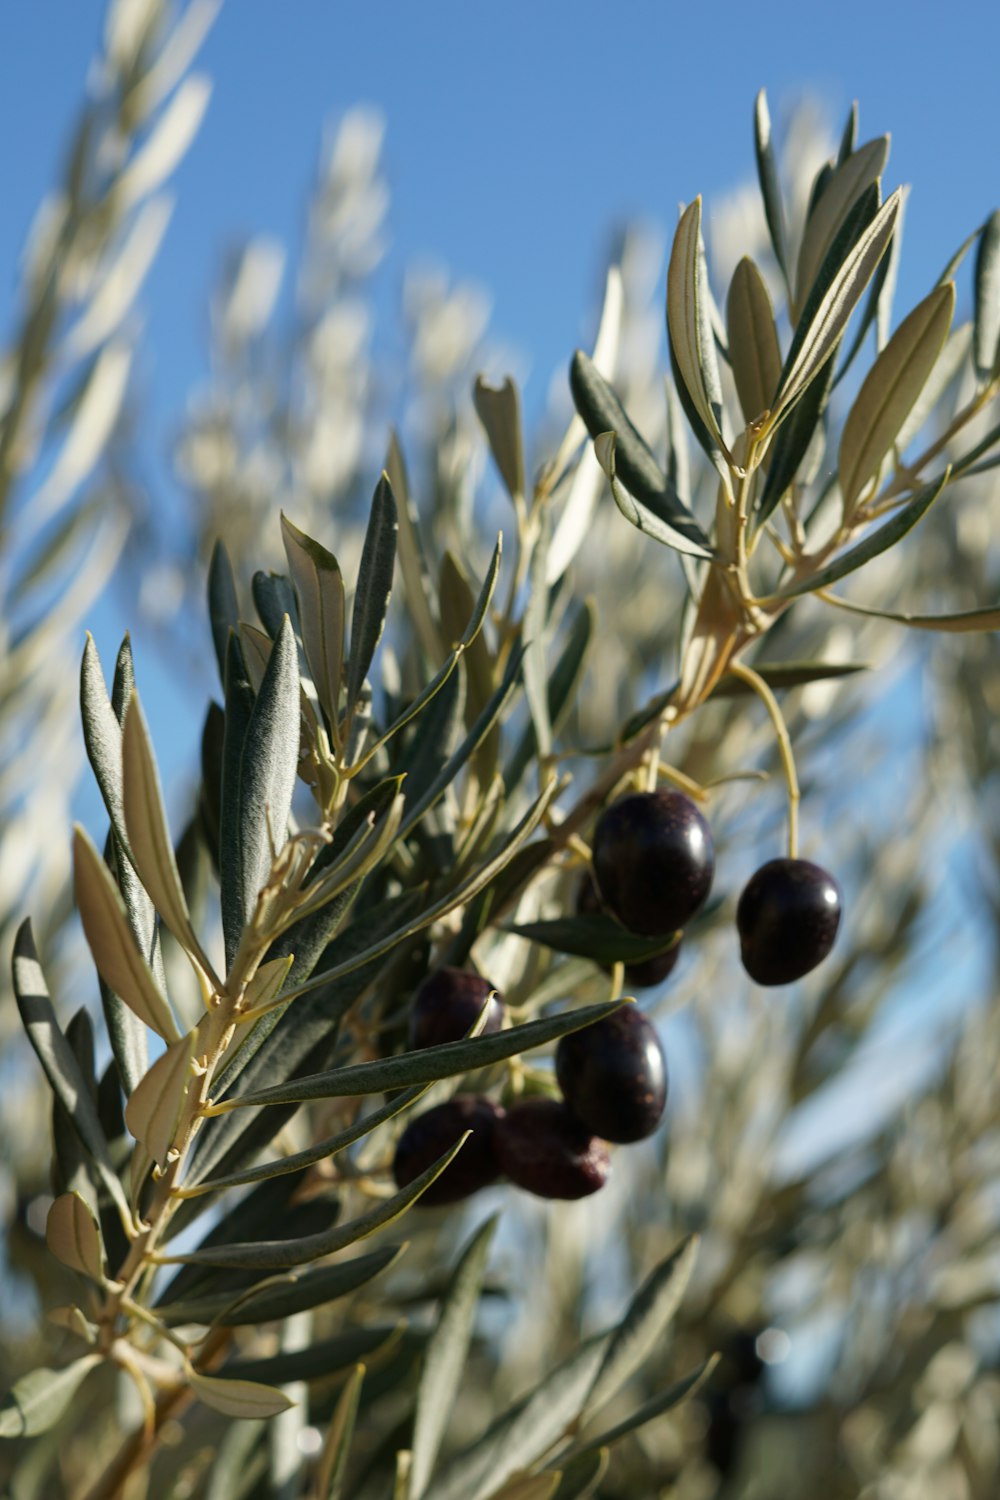 olives growing on an olive tree with blue sky in the background